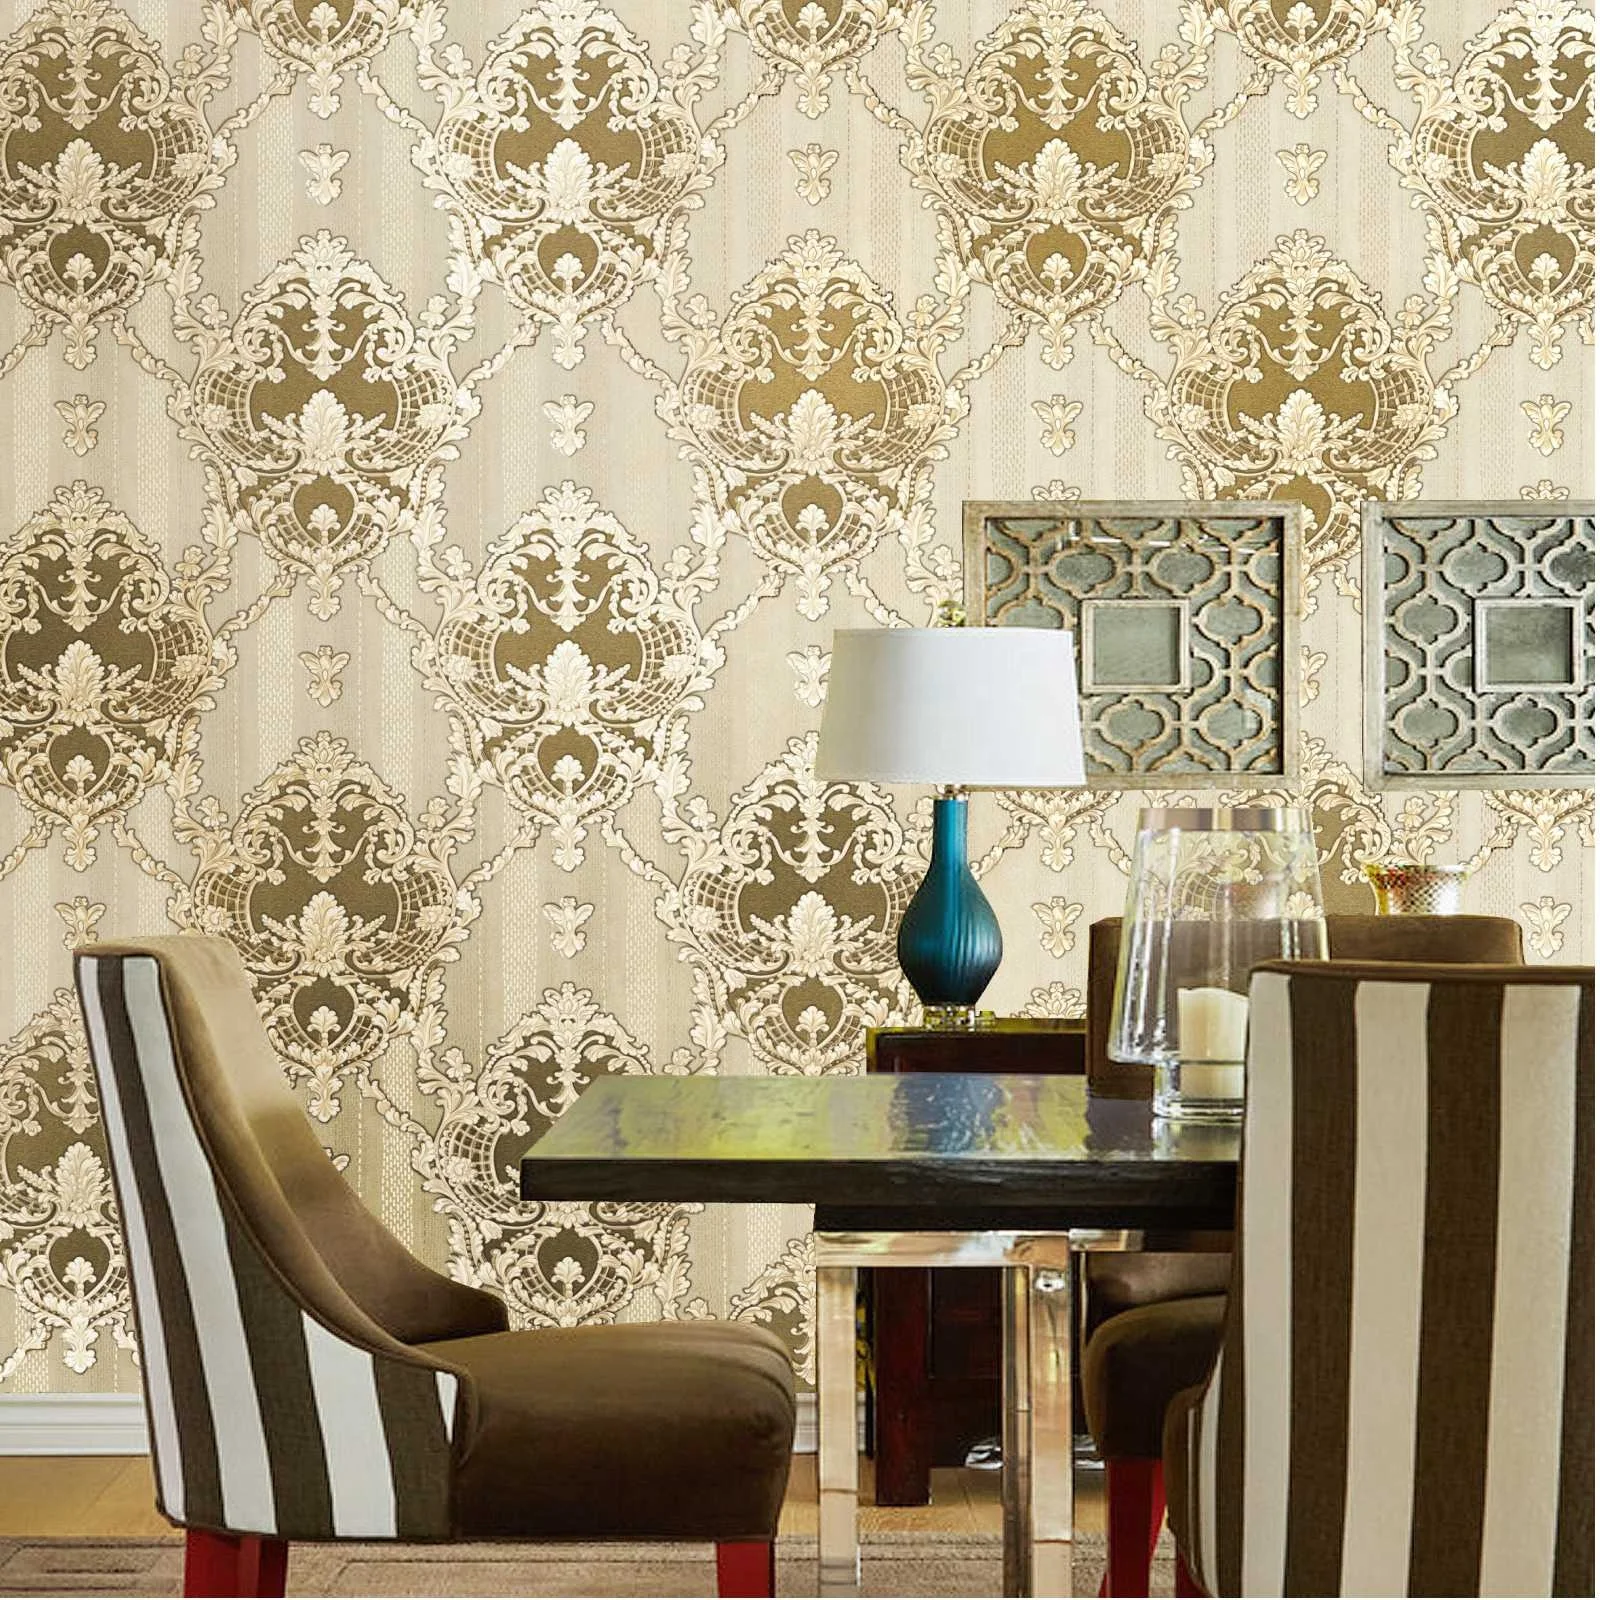 Yt-wl 799 Europe Wall Paper Rolls Hotel Room Home Decoration Bedroom Lobby  Design 3d Gold Damask Classic Wallpaper For Walls - Buy Classic Wallpaper  For Walls,3d European Wallpaper,3d Wallpaper Home Decoration Product